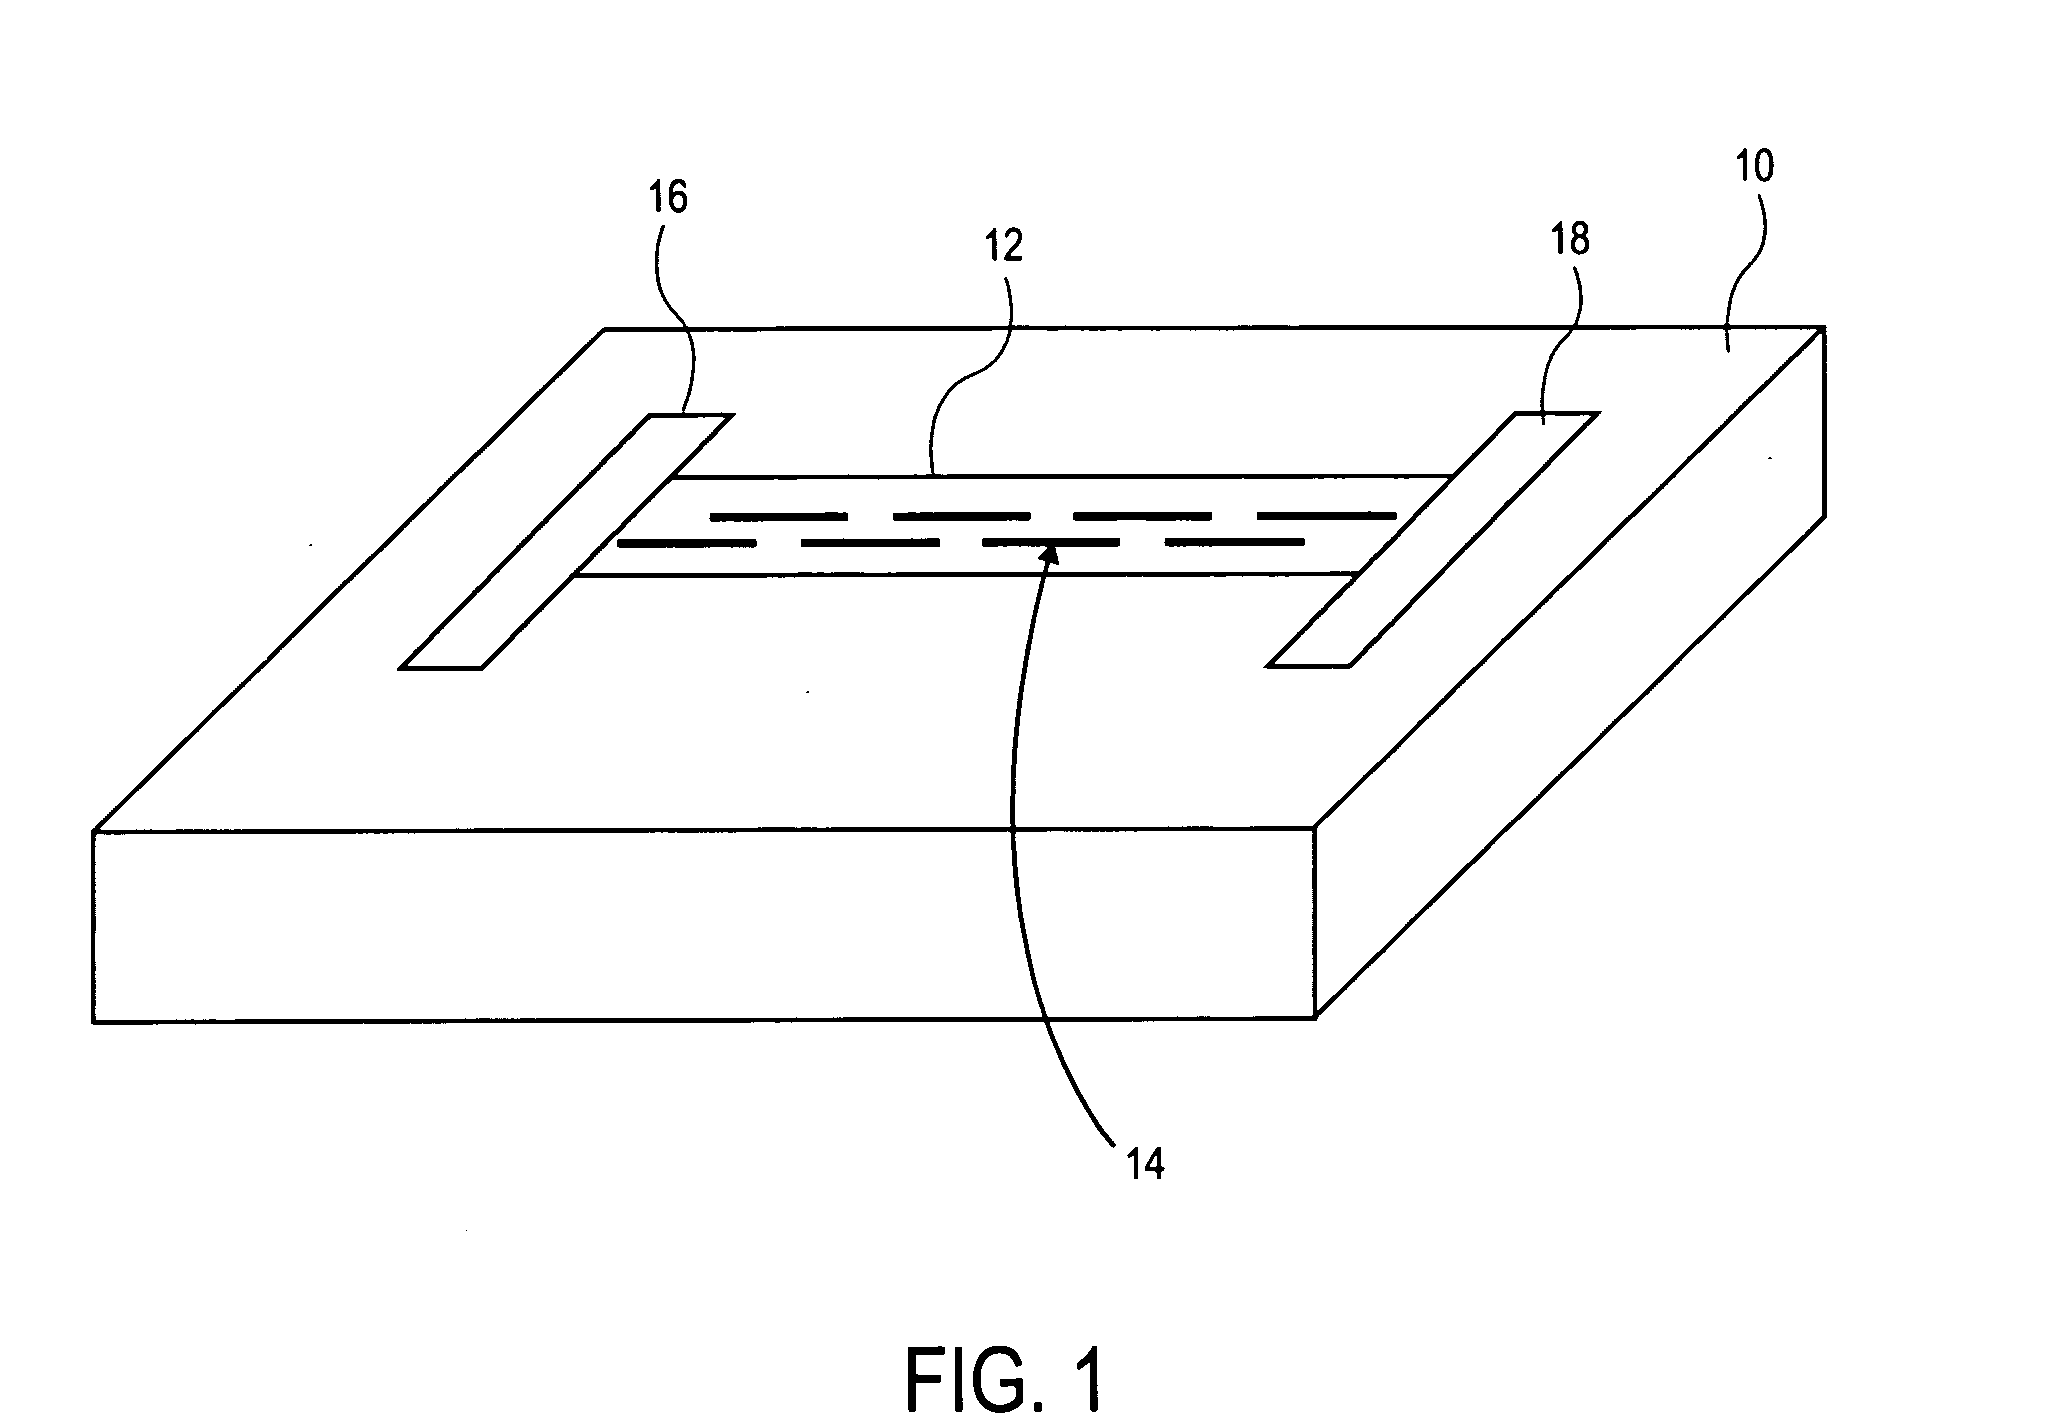 Stress sensor for in-situ measurement of package-induced stress in semiconductor devices